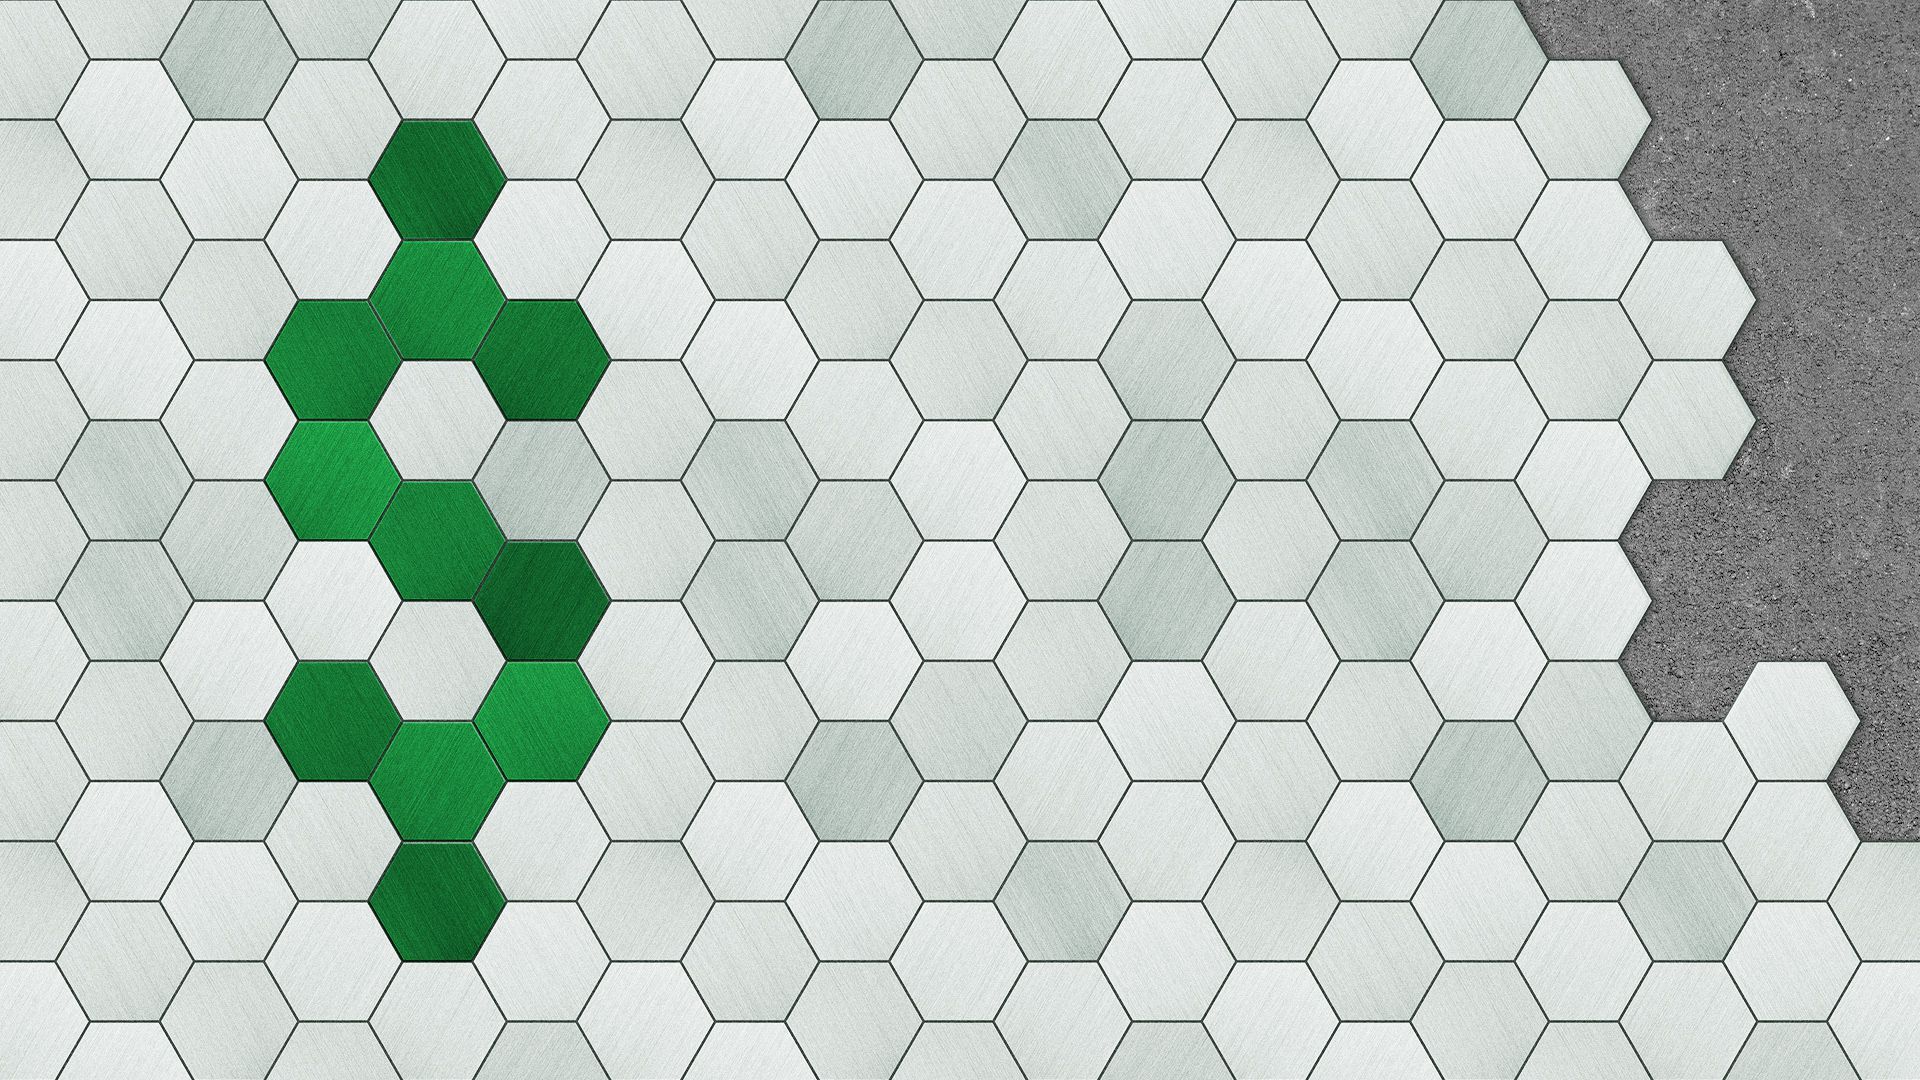 Illustration of hexagonal floor tiles with the shape of a dollar sign highlighted in a different color.